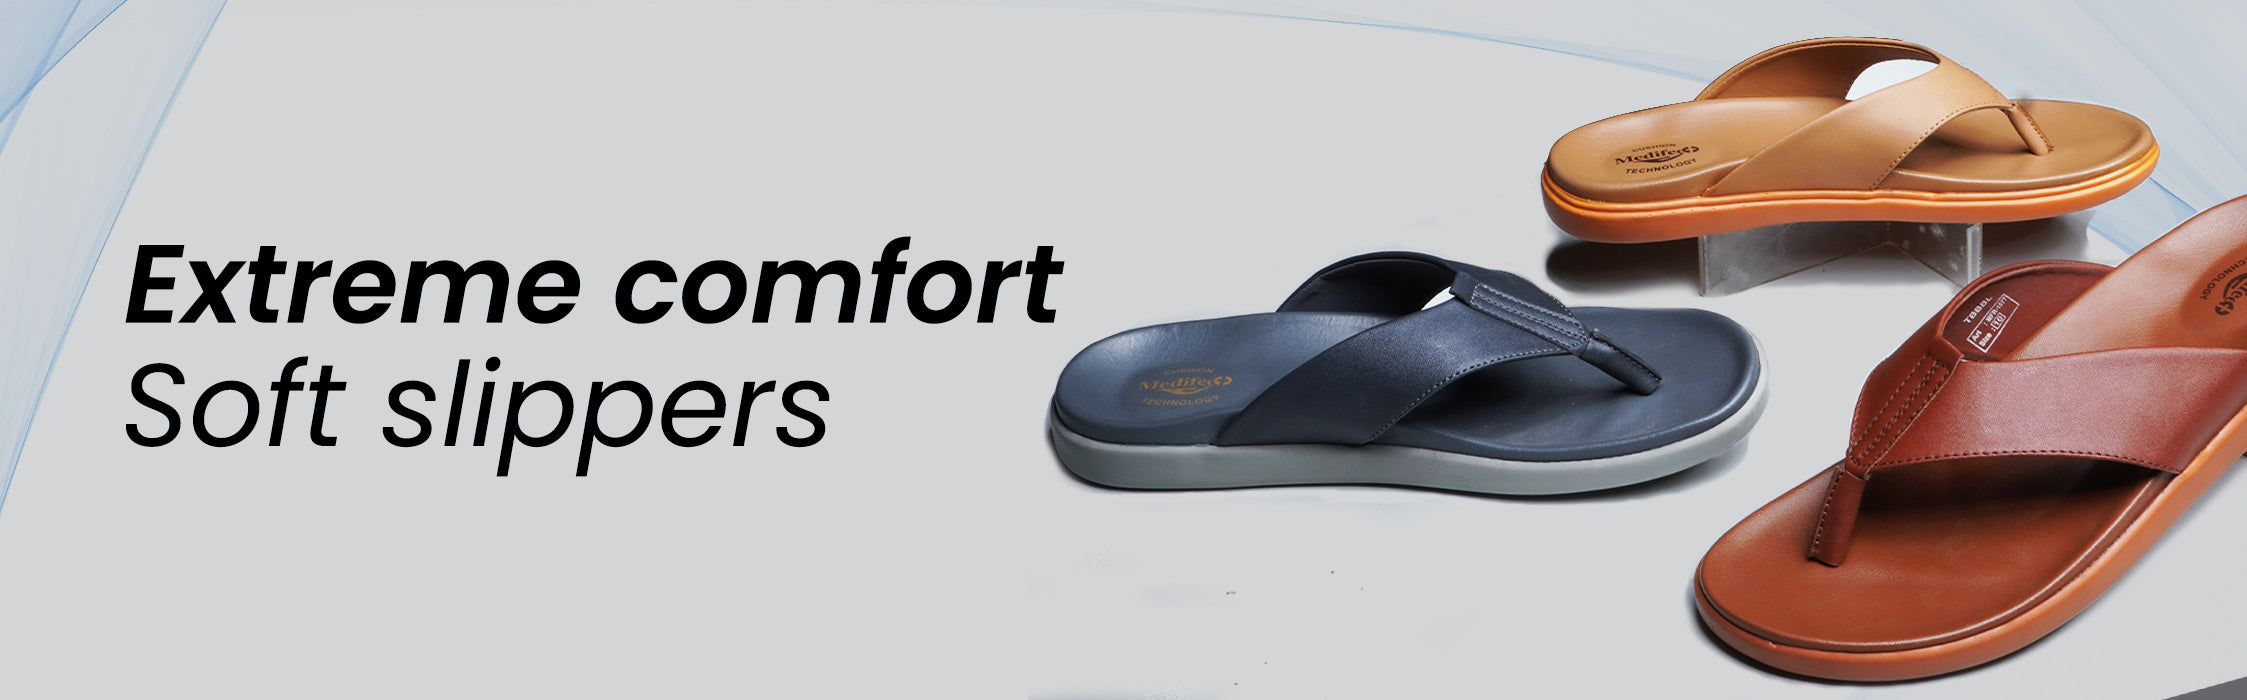 Ortho+Rest – 100% Comfort Footwear for Men and Women